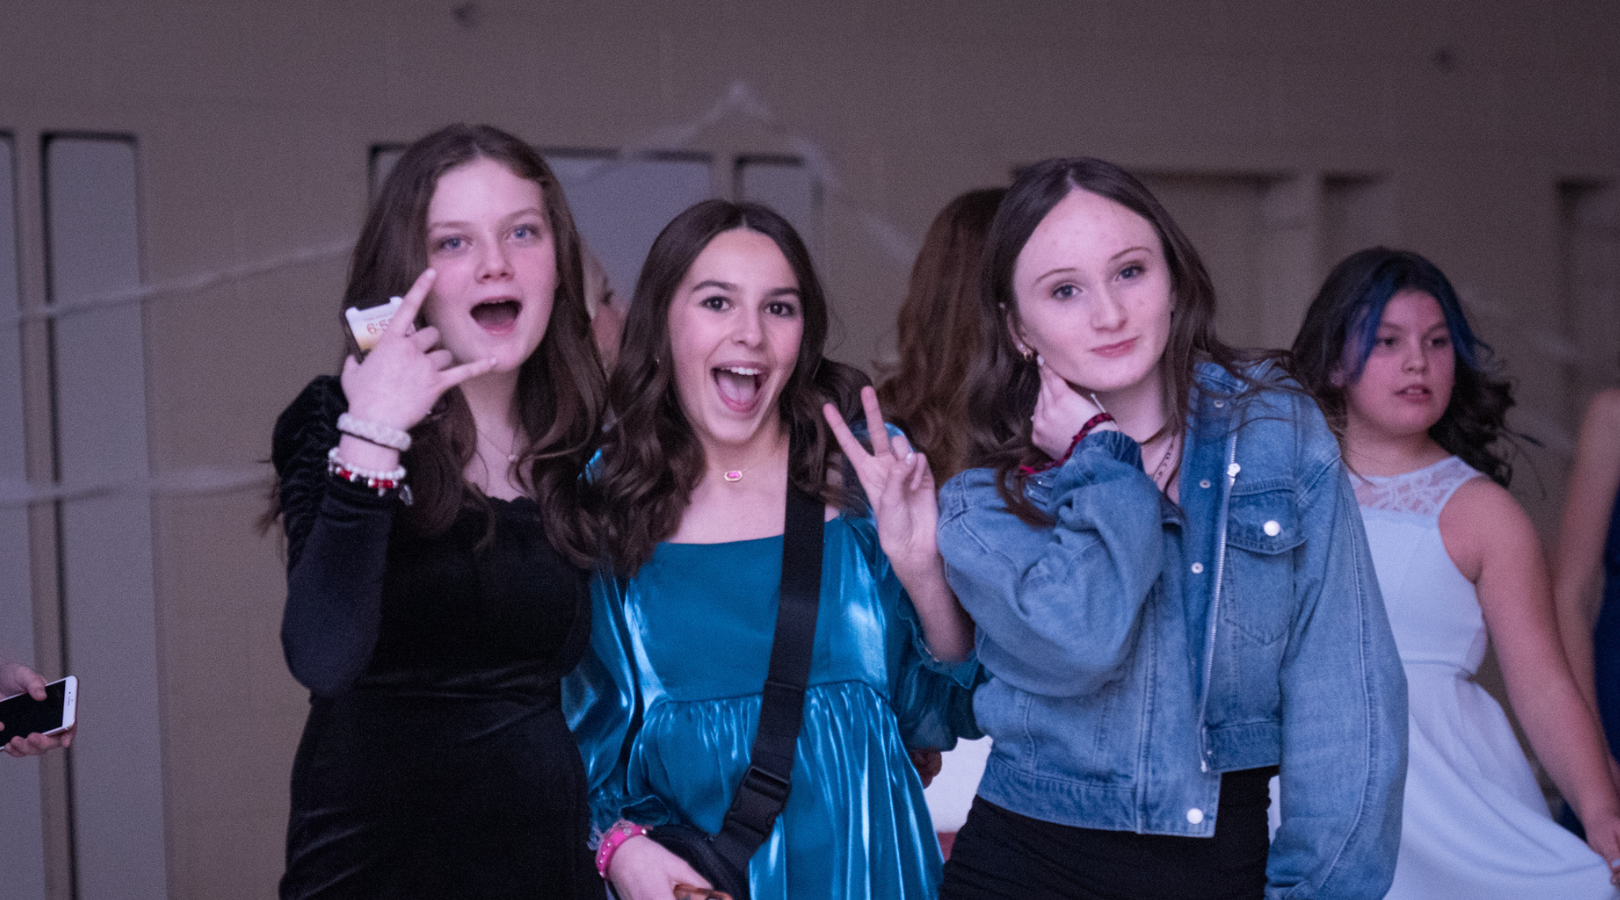 students pose for the camera at a school dance